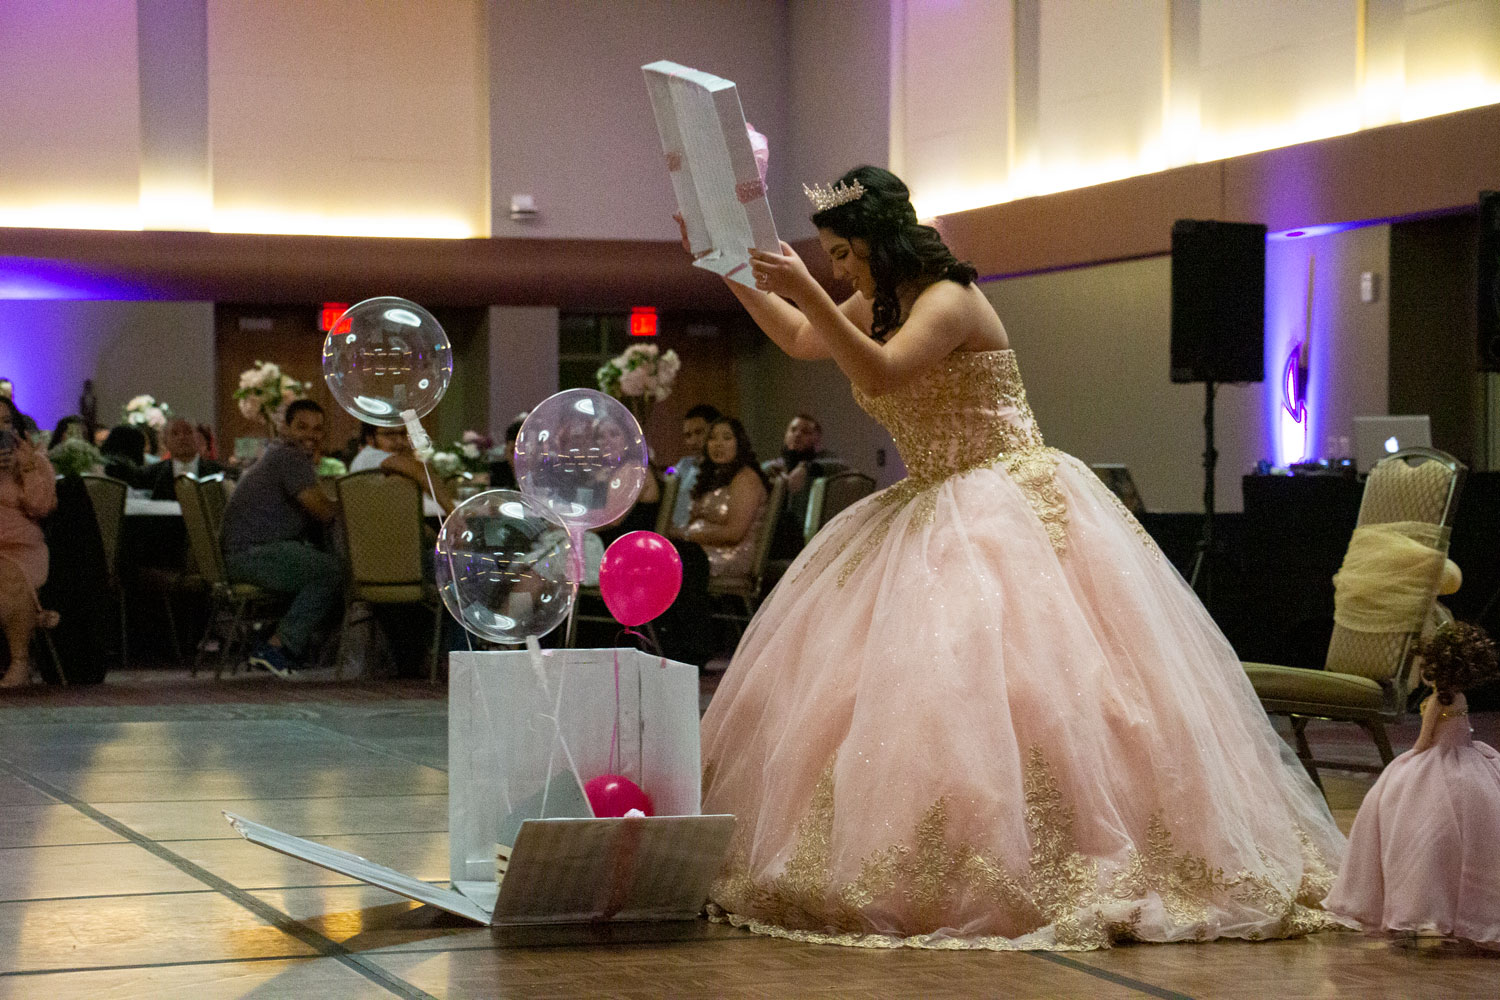 MeLeigha opening gifts during the ceremony while celebrating her Quince.